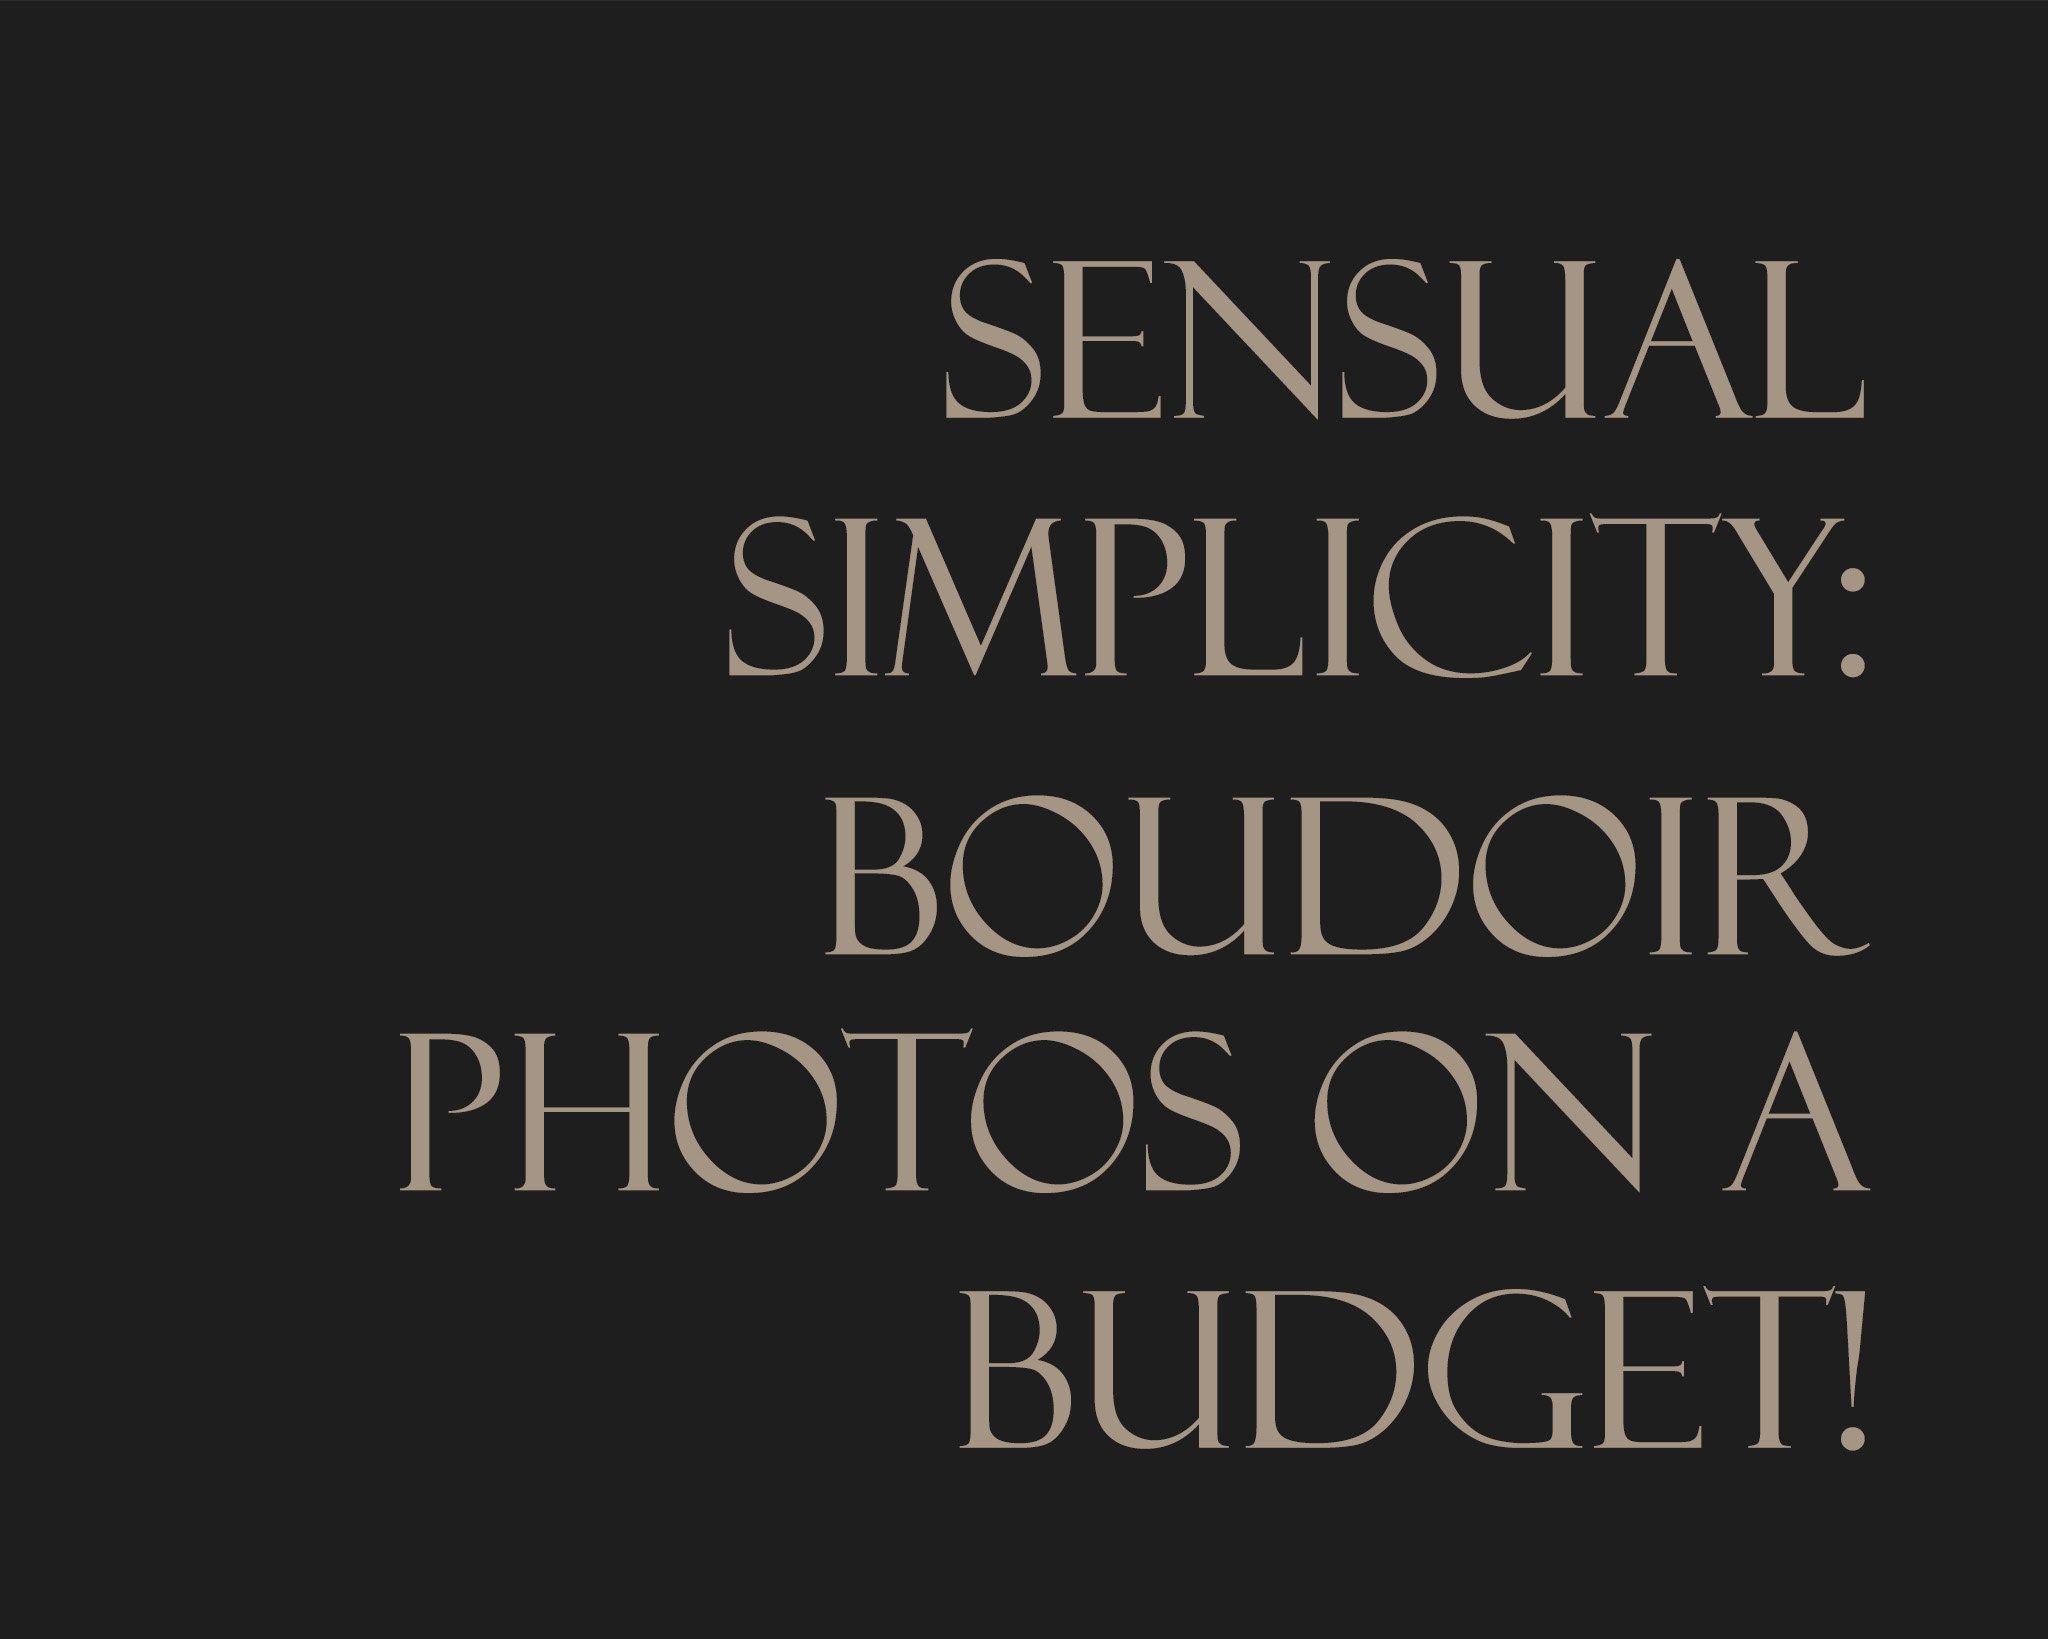 📸✨ Sensual Simplicity: Boudoir Photography on a Budget! ✨📸

At my studio, elegance meets affordability! If you&rsquo;re a woman over 25 looking to capture your most captivating moments without breaking the bank, you&rsquo;re in the right place.

Di